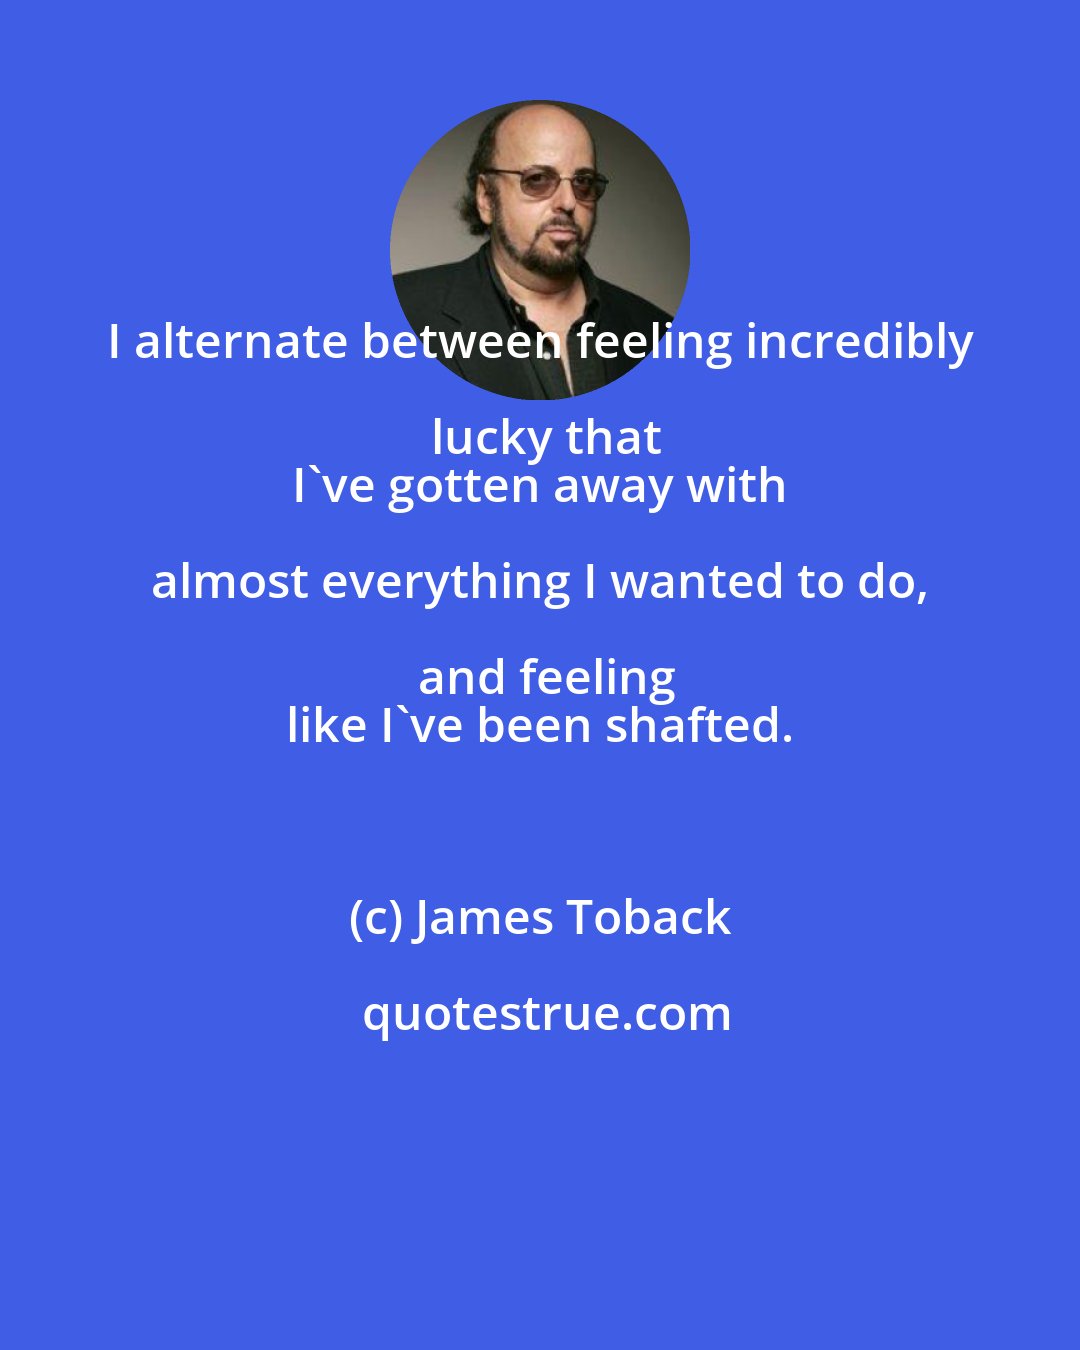 James Toback: I alternate between feeling incredibly lucky that
 I've gotten away with almost everything I wanted to do, and feeling
 like I've been shafted.